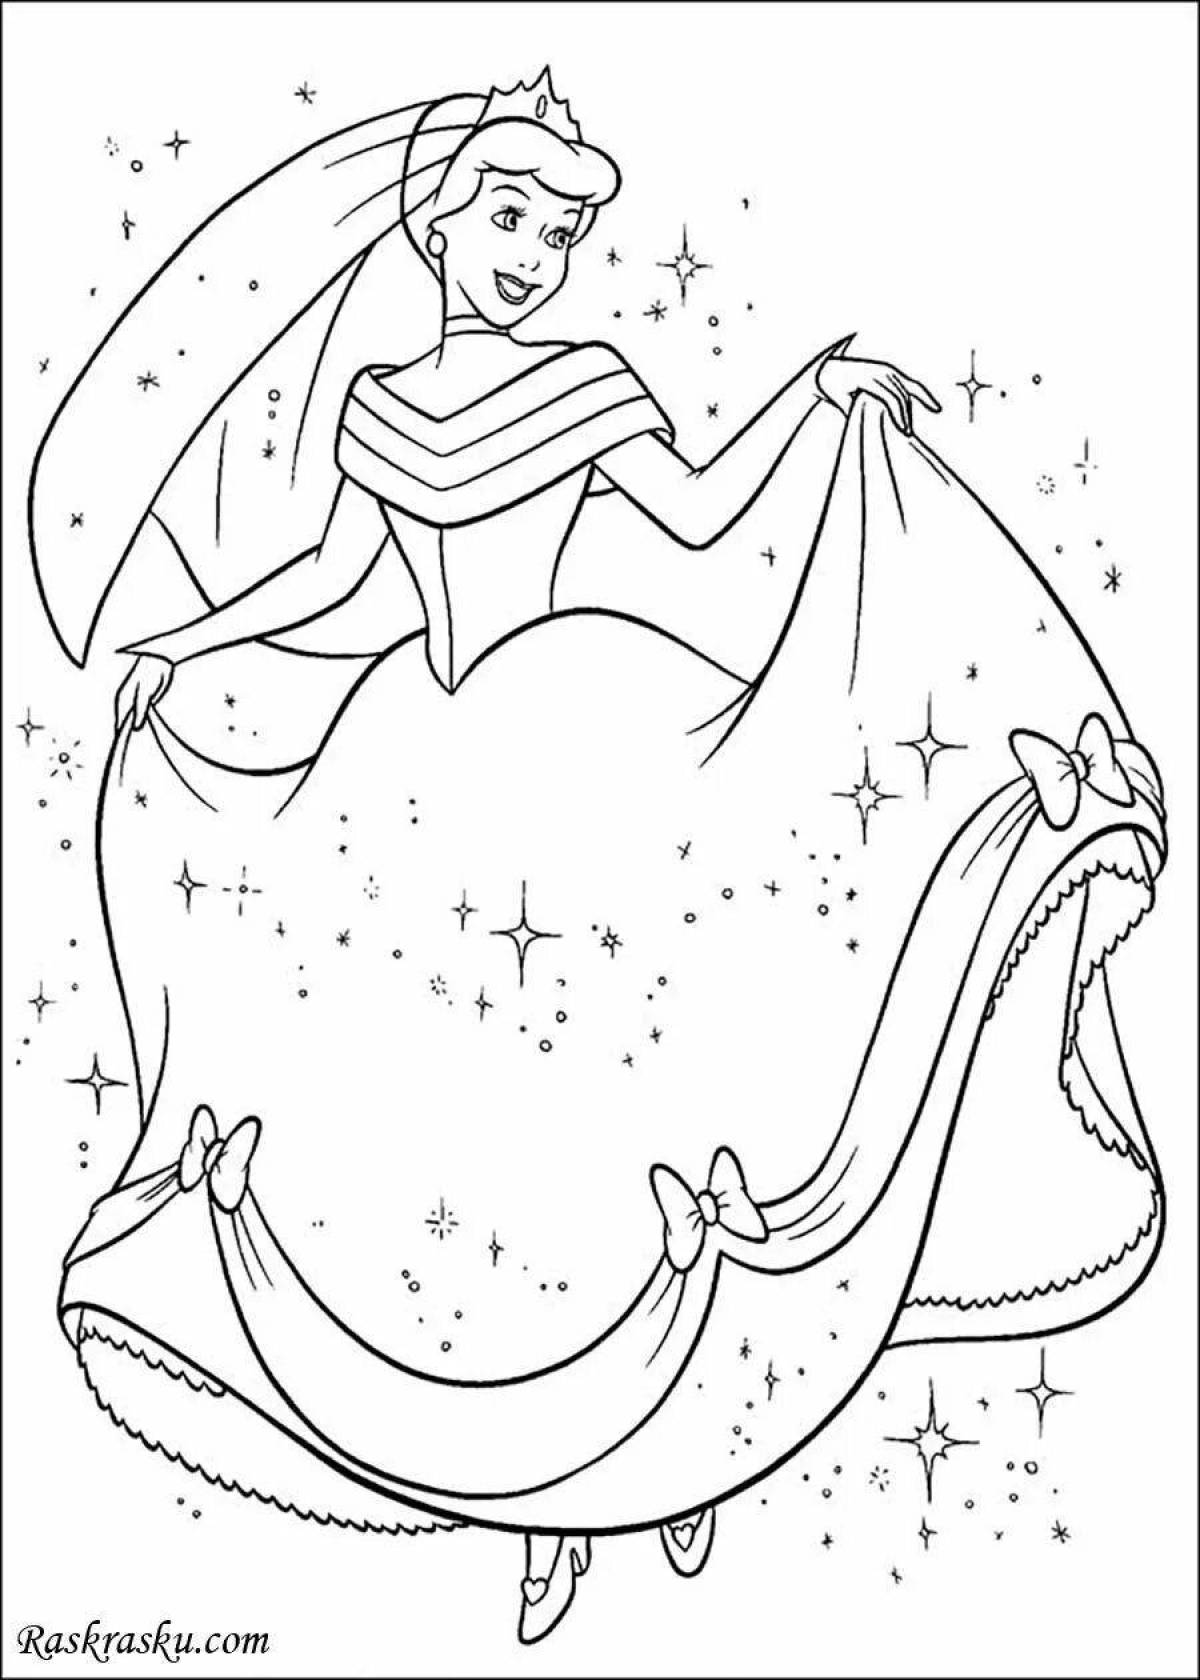 Cinderella's whimsical disney coloring page